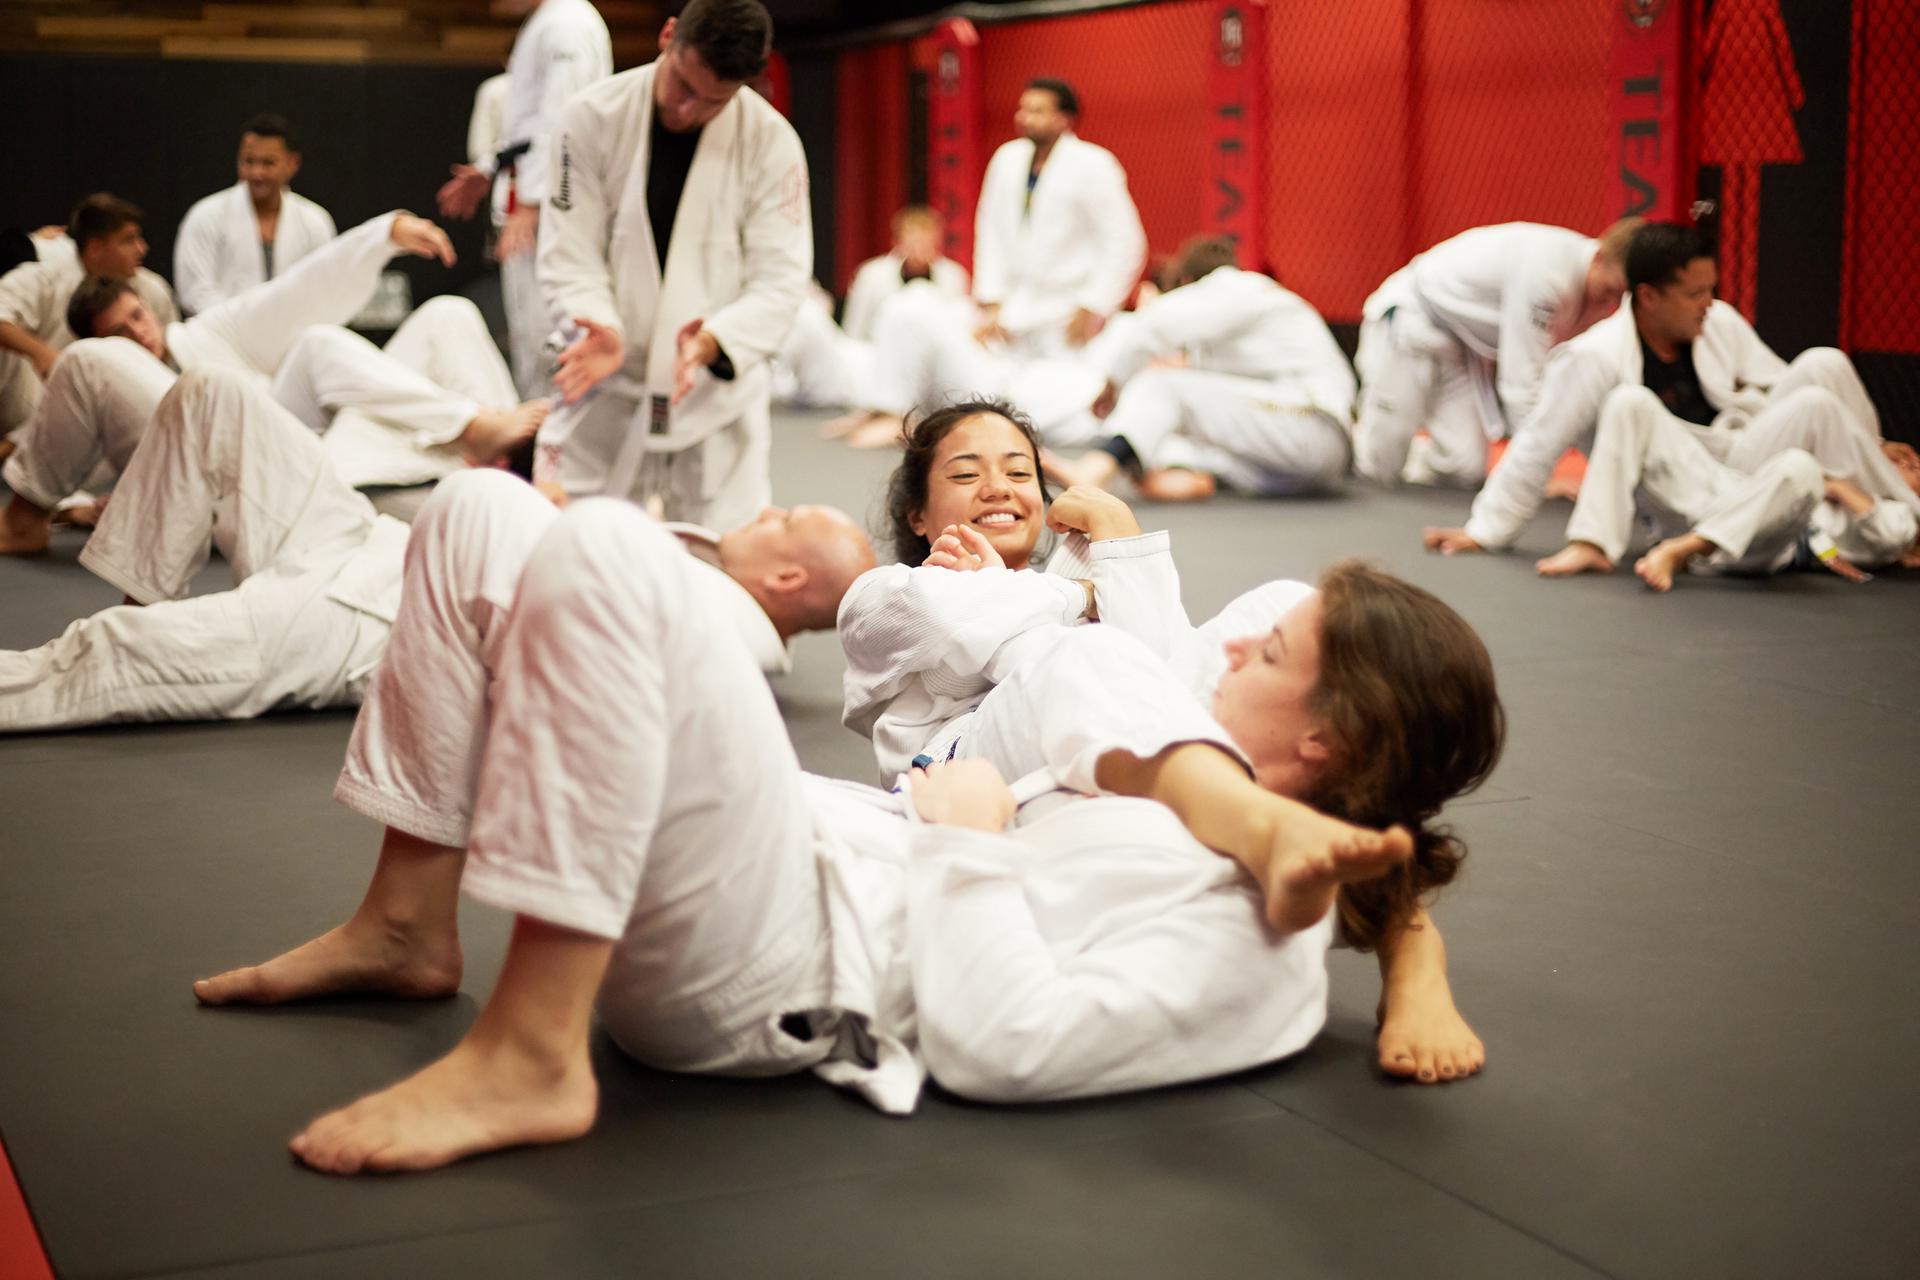 a fun class where two females are practicing jiu jitsu moves with each other and smiling